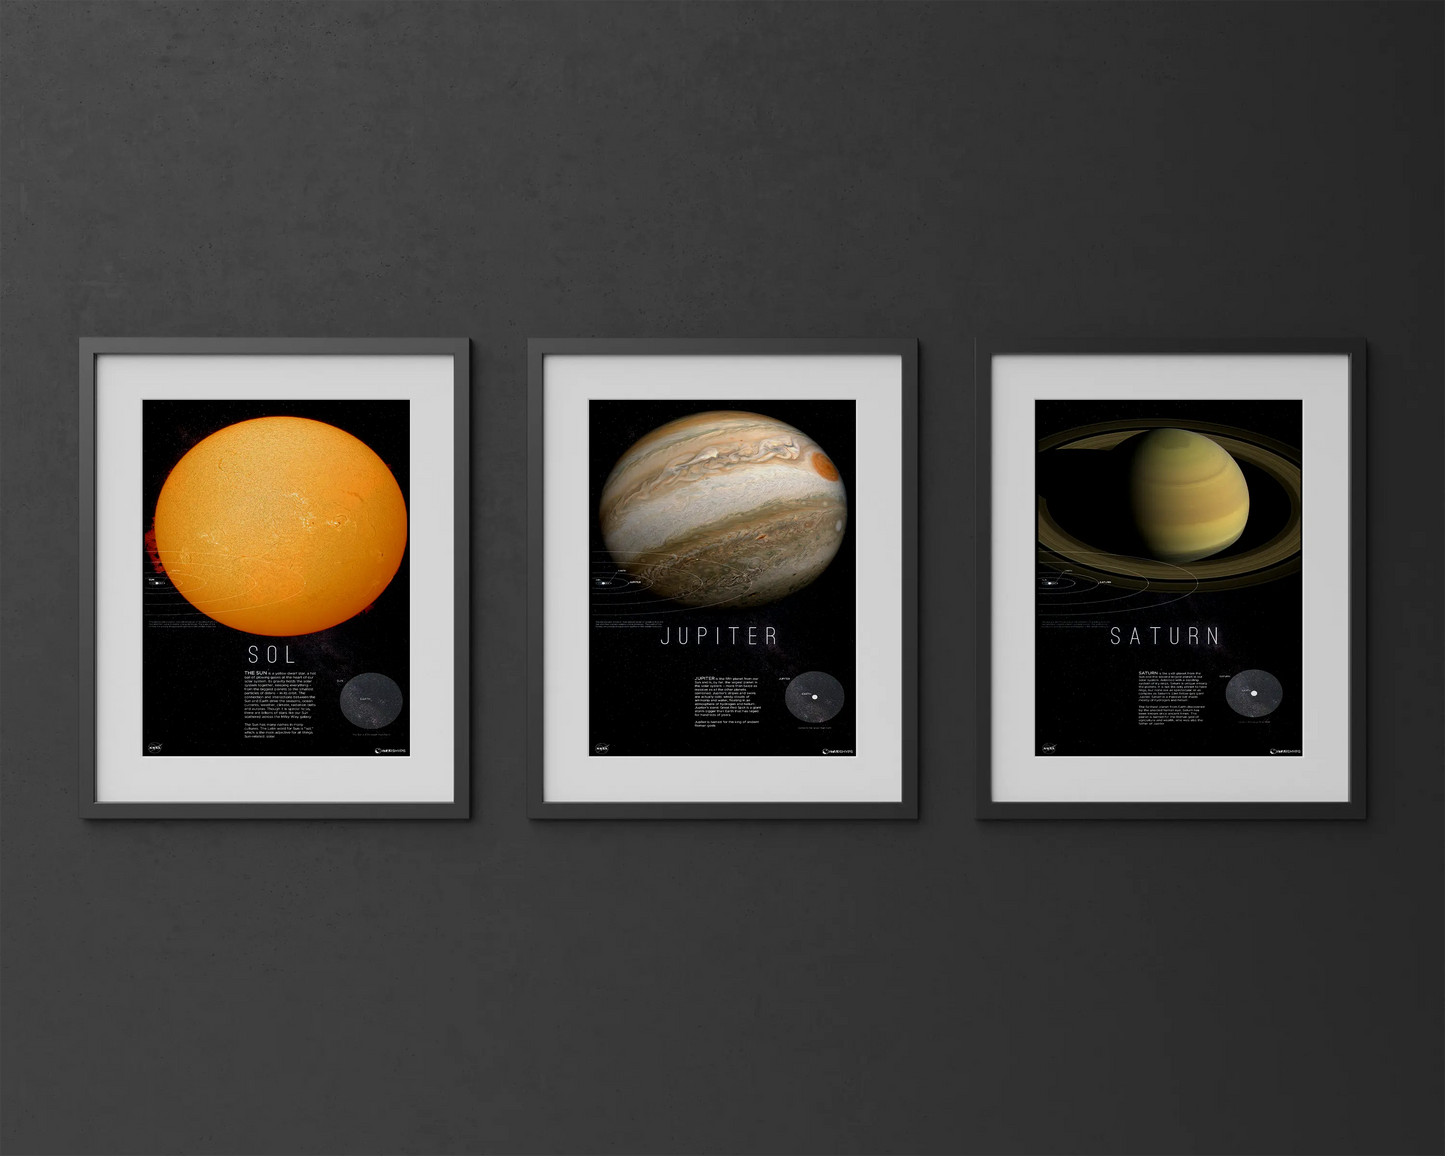 Solar Radiance Decor | Sun Center Print | Rocket Blueprint Posters | The image displays three framed posters on a dark background, each featuring an image and description of the Sun, Jupiter, and Saturn, with their names prominently labeled below the images.